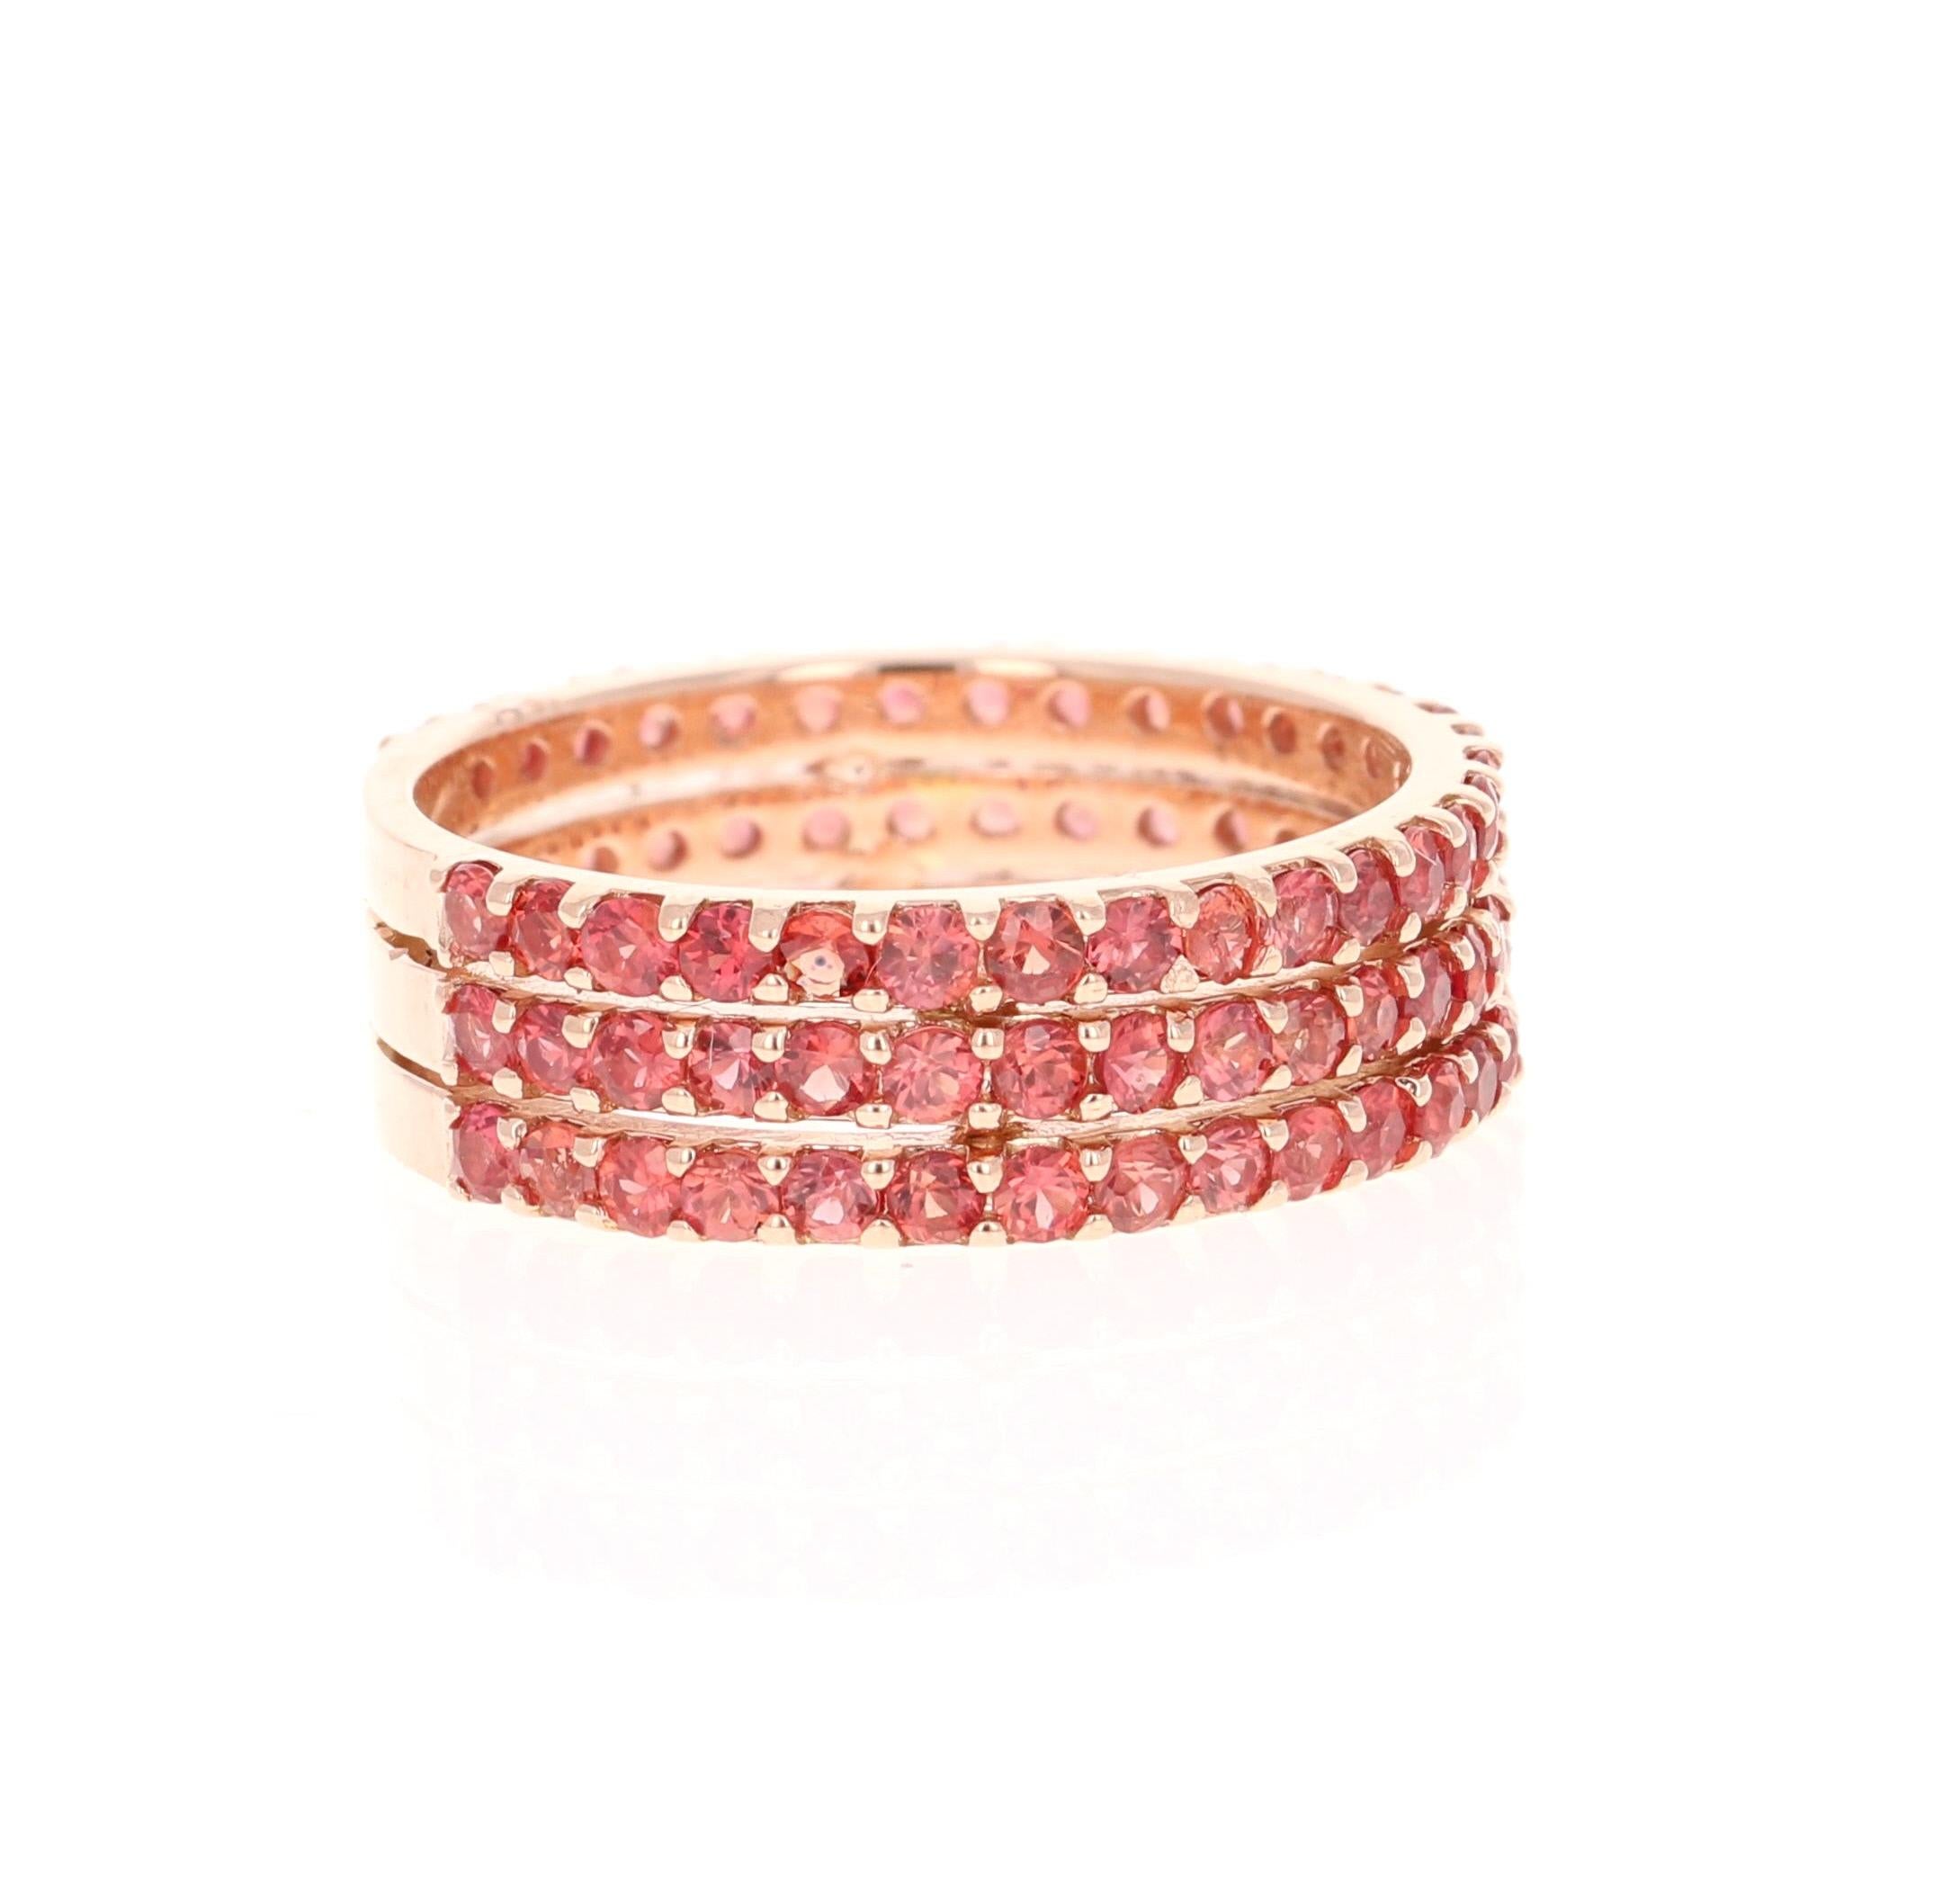 This ring has 90 Natural Round Cut Red Sapphires that weigh 2.50 Carats. 

Crafted in 14 Karat Rose Gold and weighs approximately 4.4 grams 

The ring is a size 7 and can be re-sized at no additional charge!